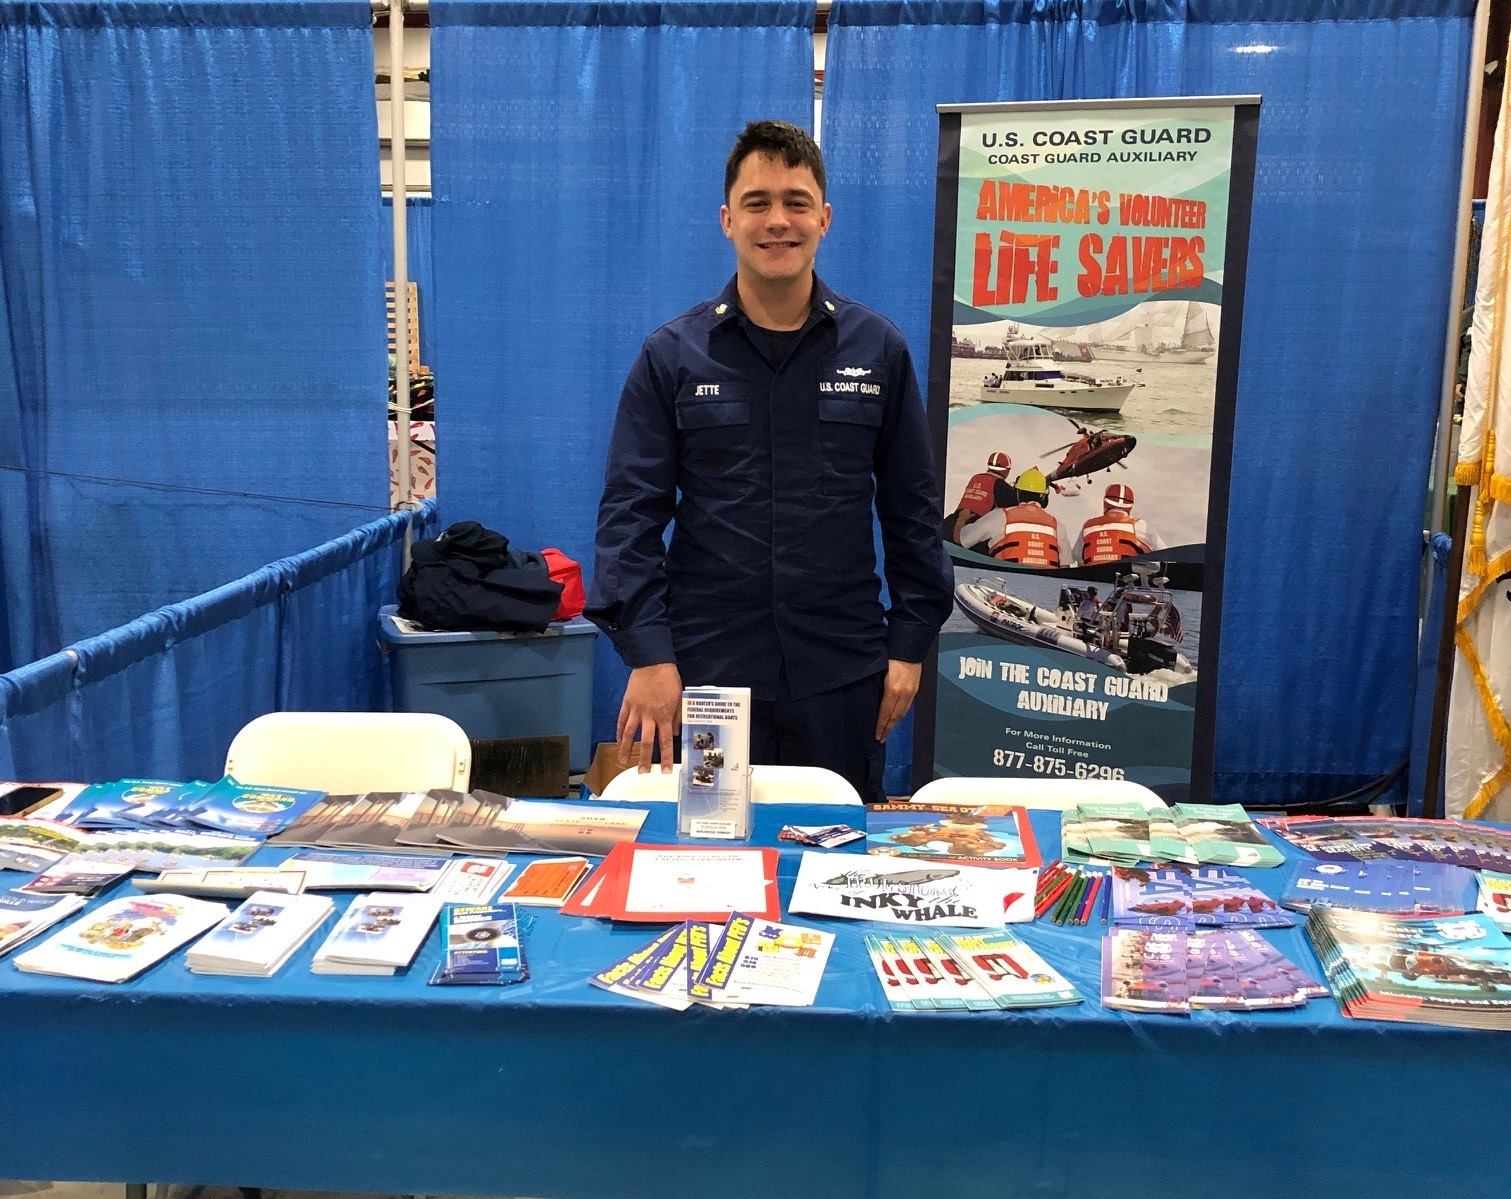 Coast guardsman standing behind boating safety table